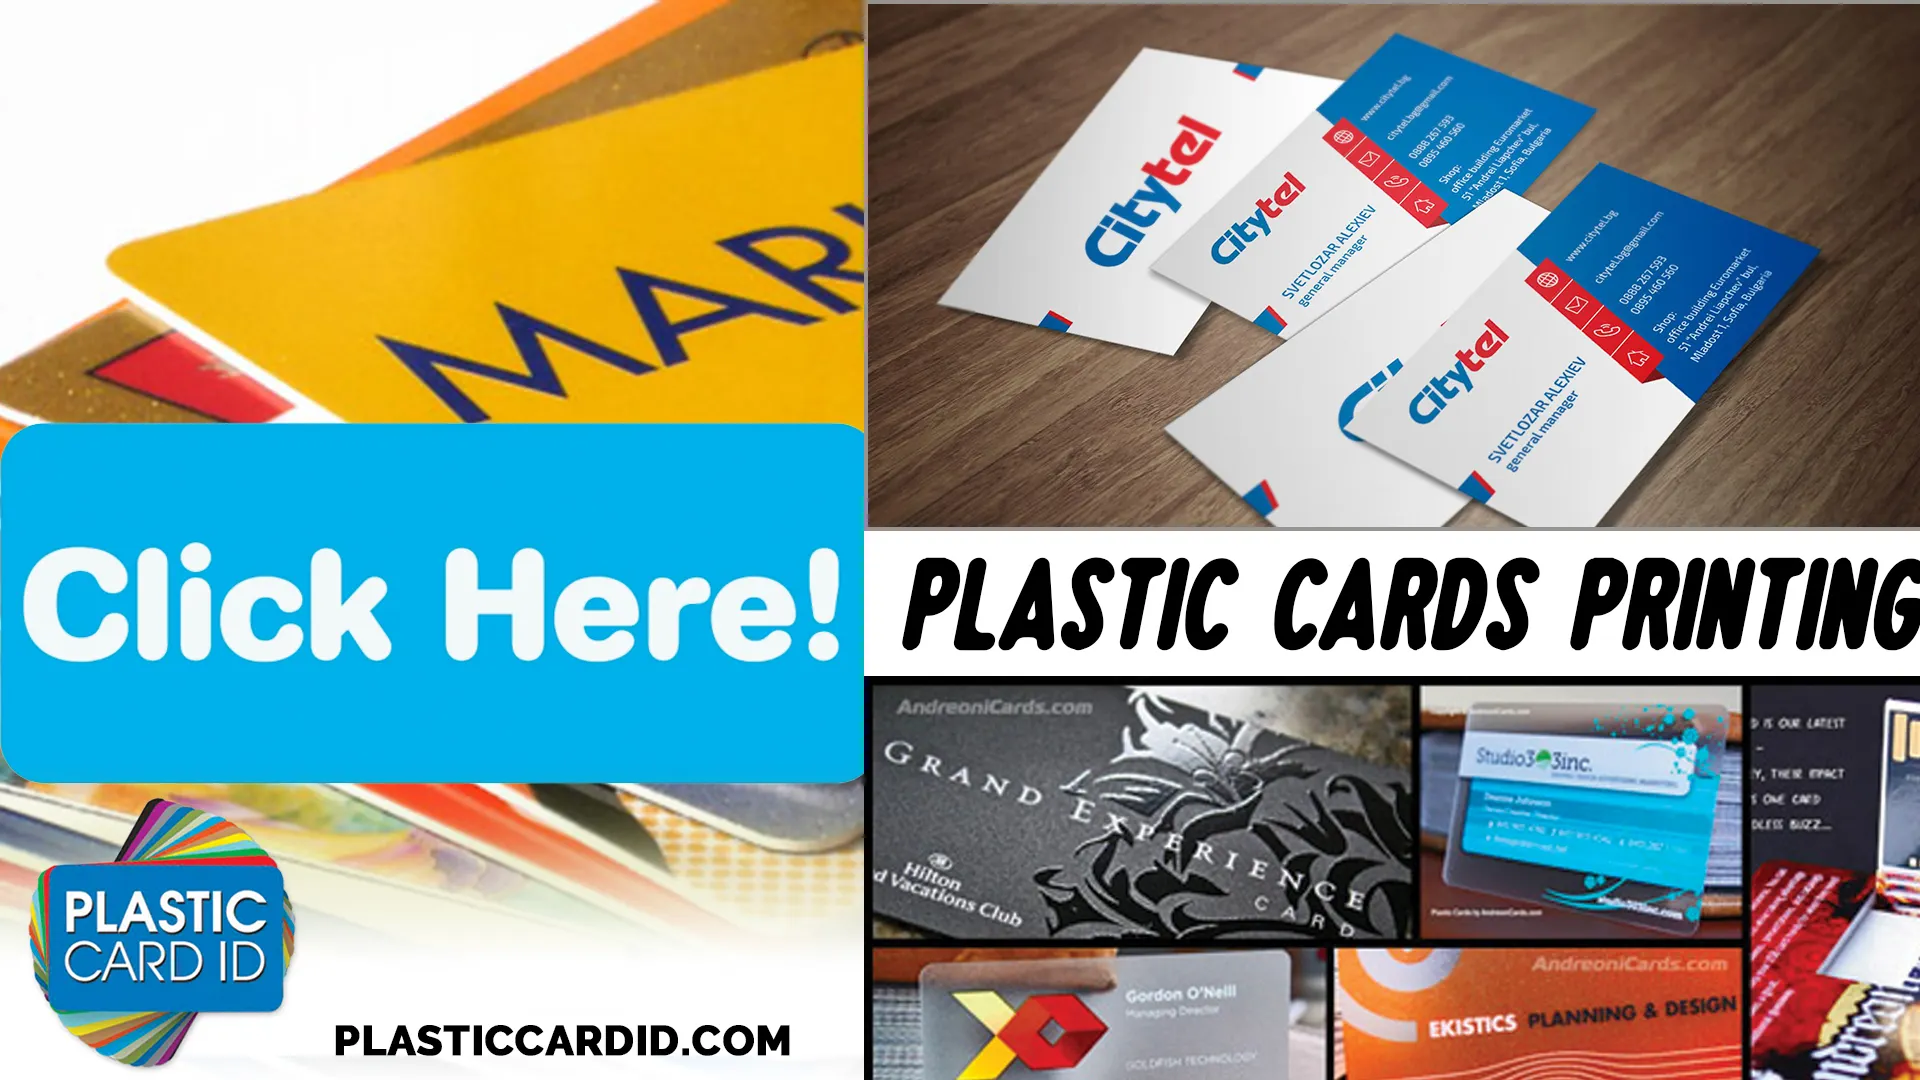 Welcome to the World of Customized Key Tags at Plastic Card ID
